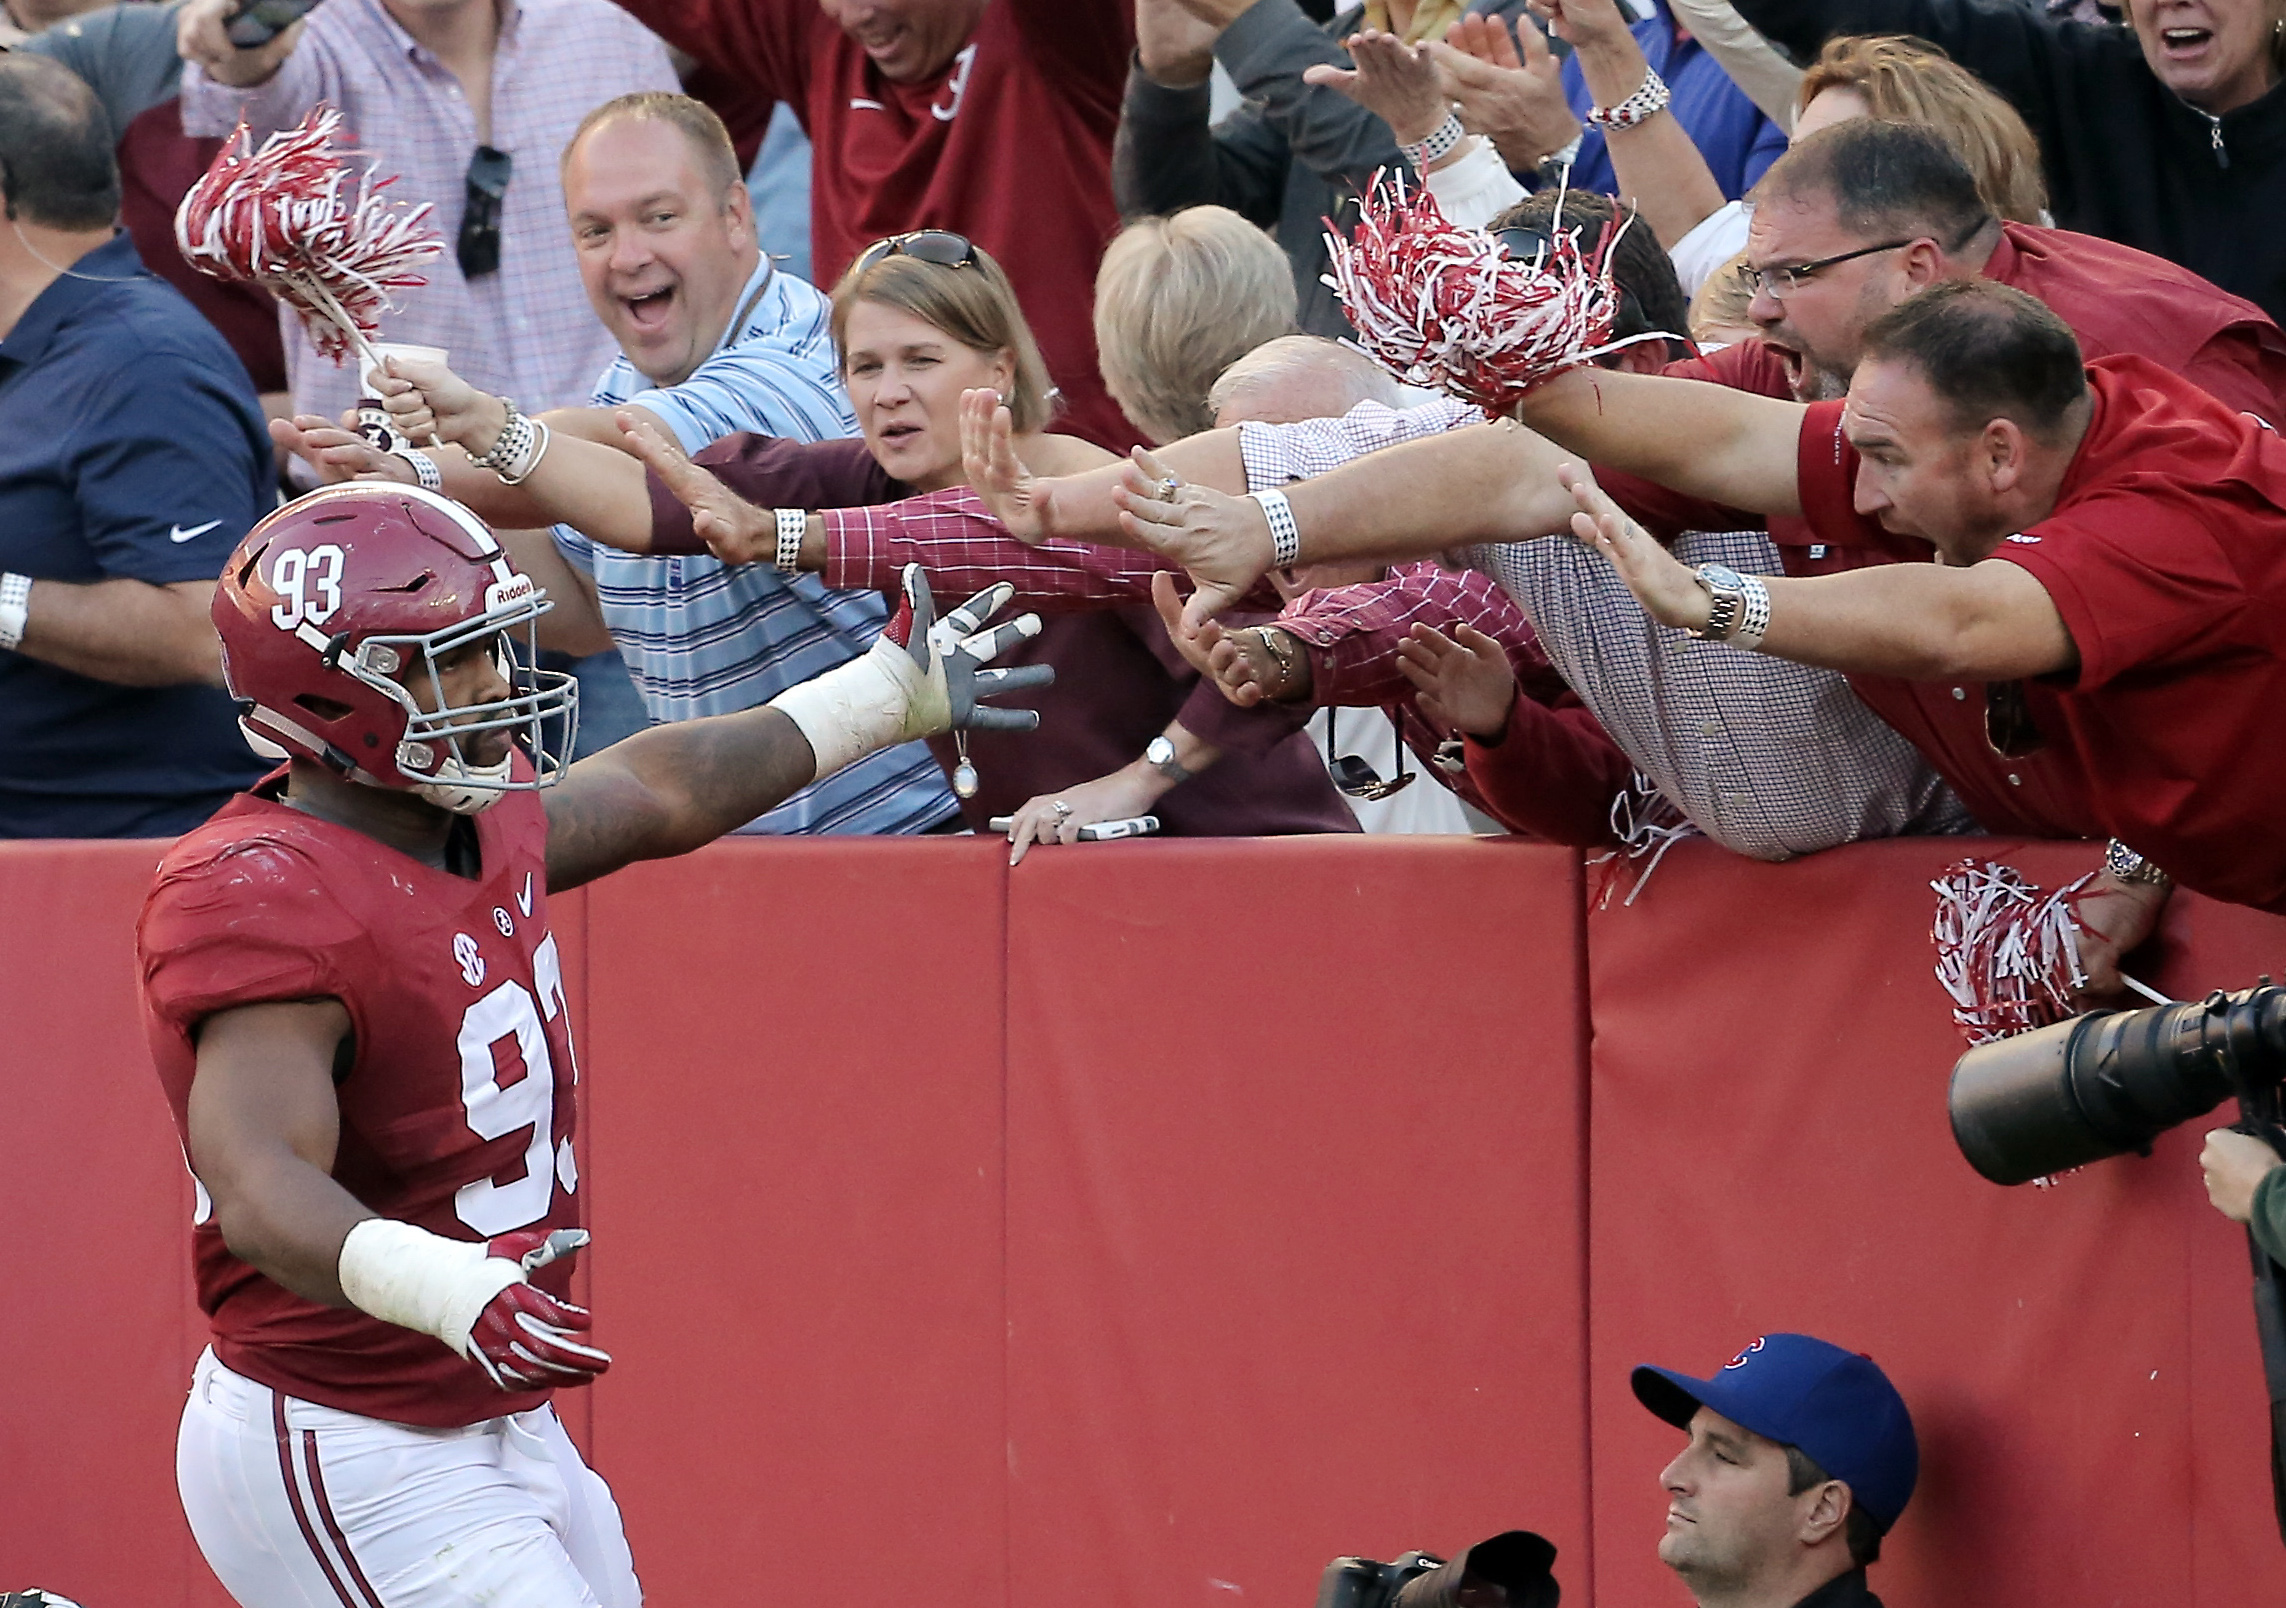 Oct 22, 2016; Tuscaloosa, AL, USA; Alabama Crimson Tide defensive lineman Jonathan Allen (93) celebrates with the fans after returning a fumble for a touchdown against Texas A&M Aggies at Bryant-Denny Stadium. Mandatory Credit: Marvin Gentry-USA TODAY Sports